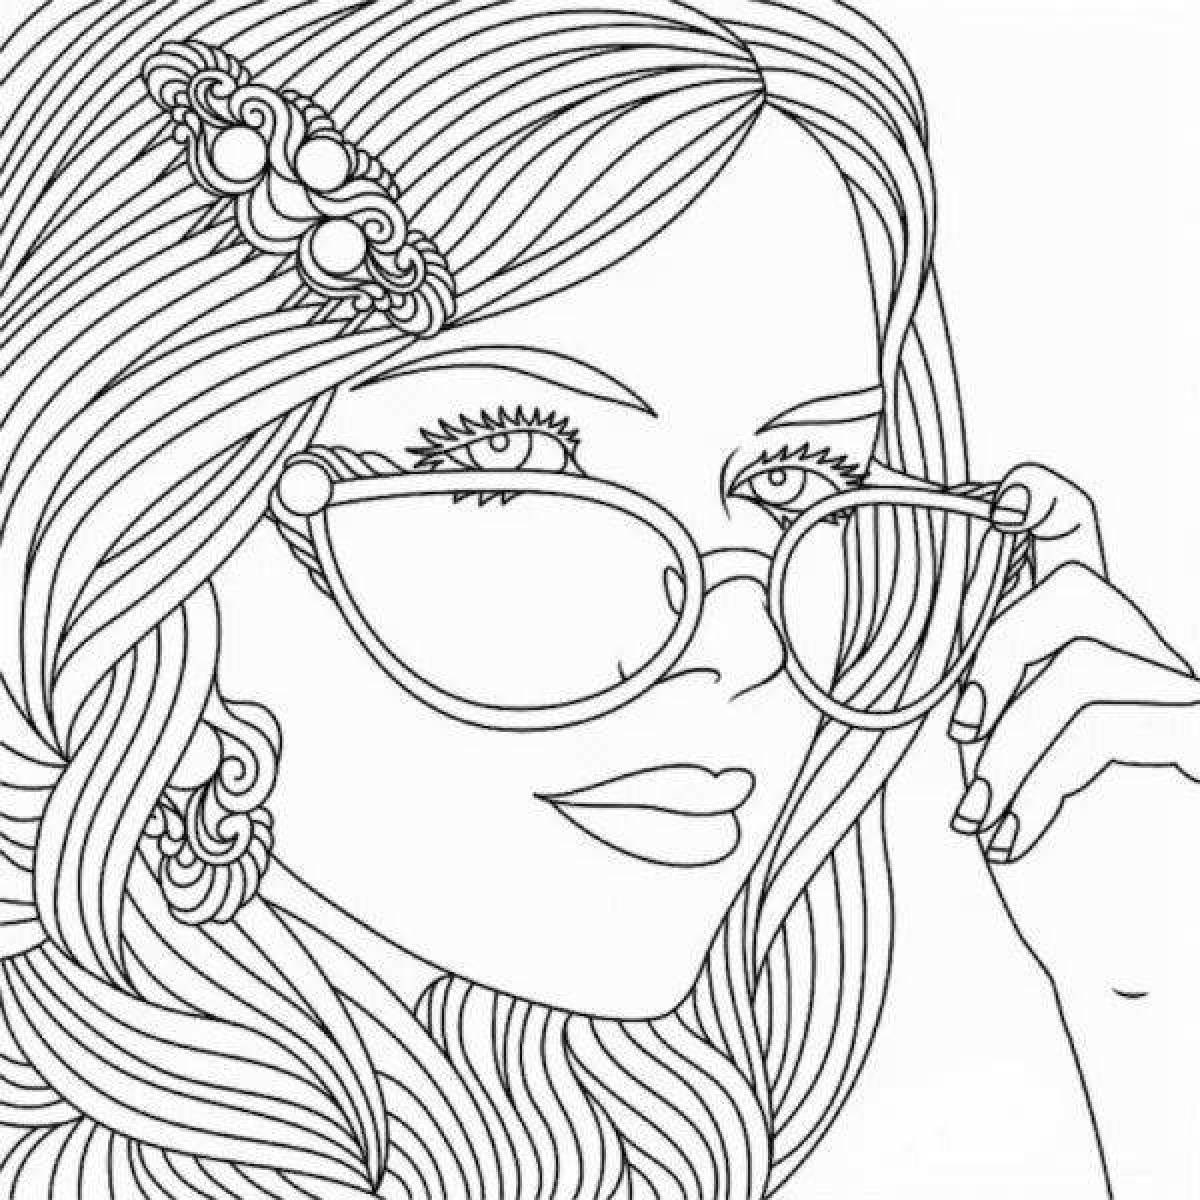 Charming fashionista coloring book